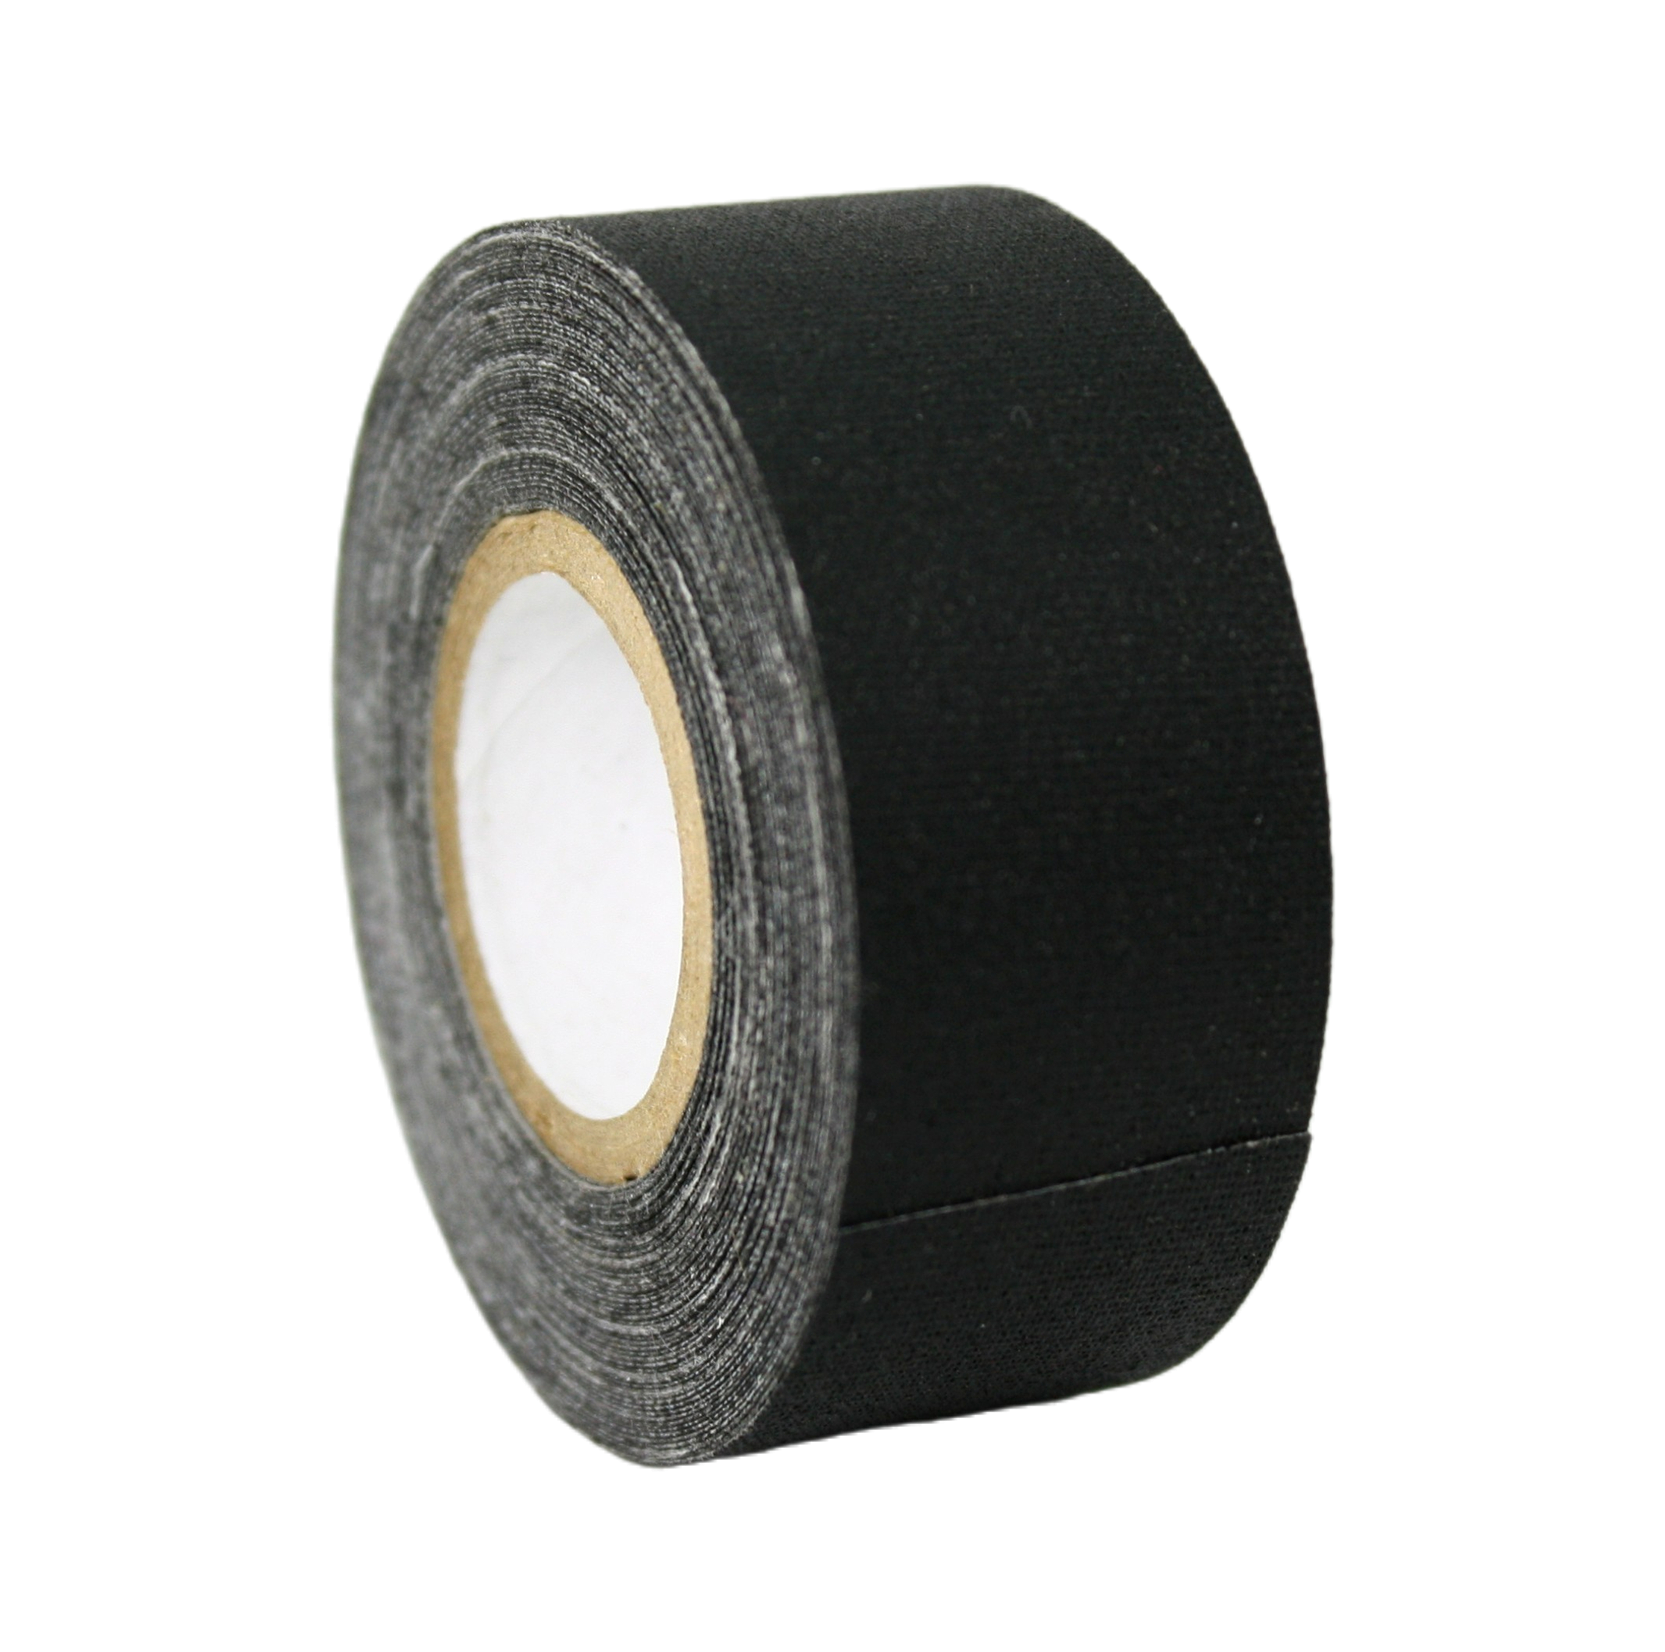 A close up of a single roll of black Micro Gaffer 1" tape